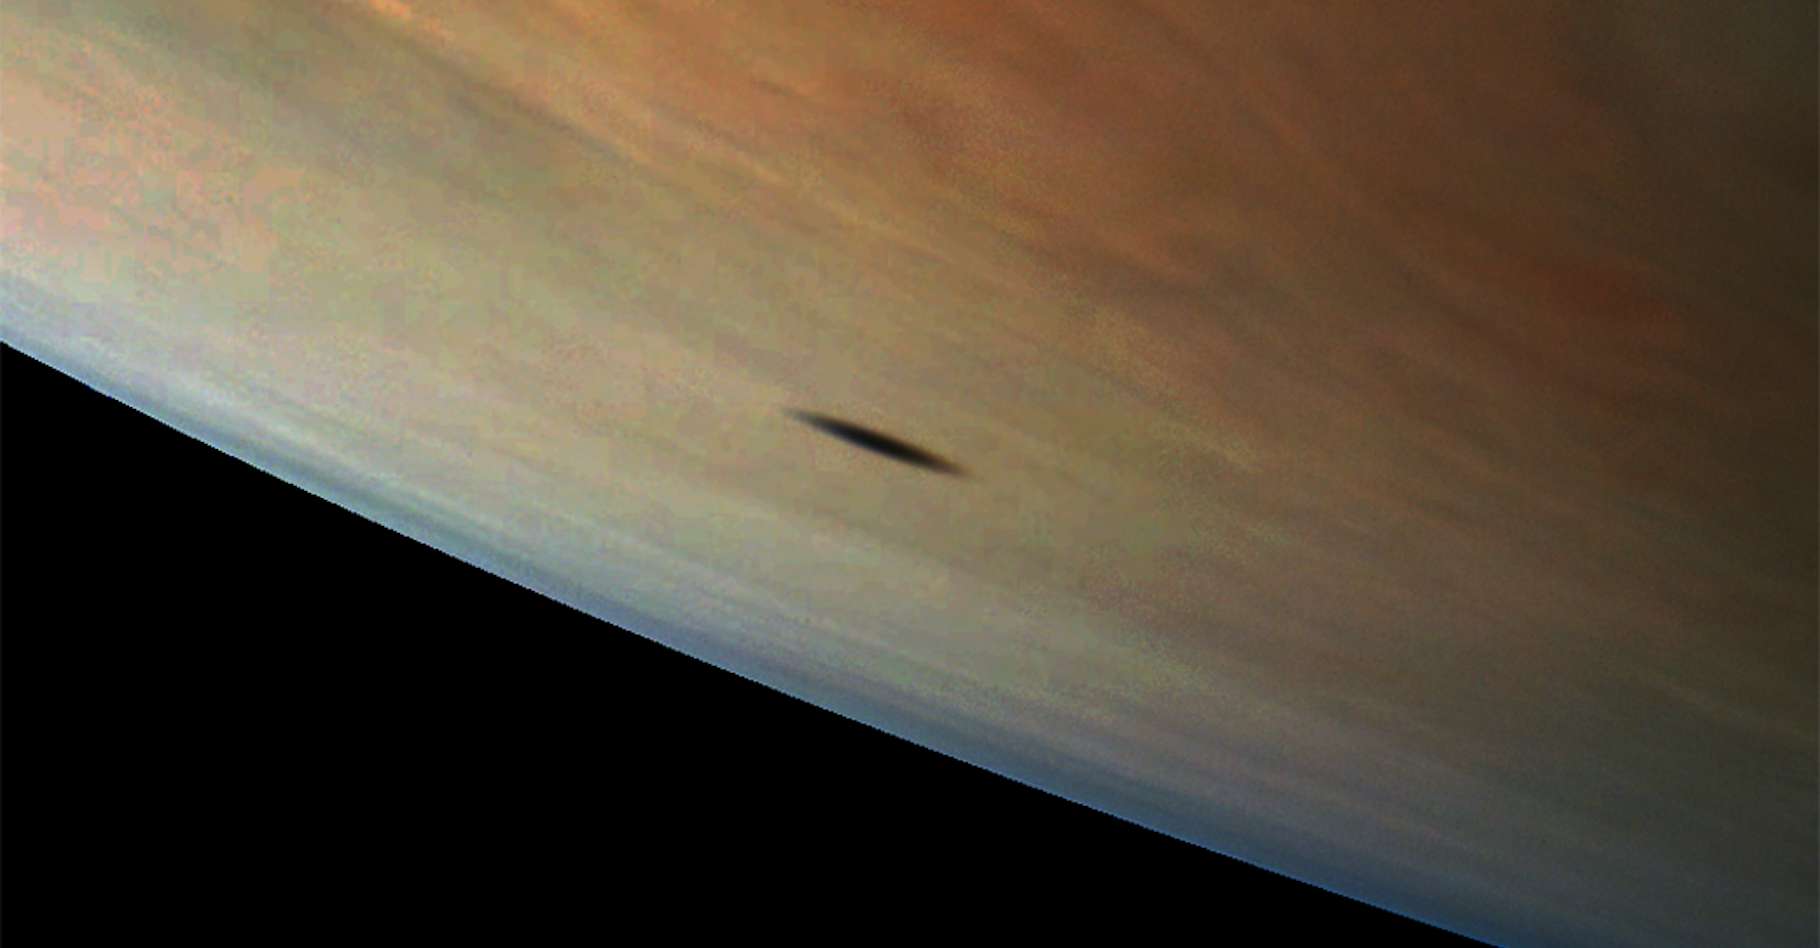 A NASA probe has photographed an object in front of Jupiter's Great Red Spot